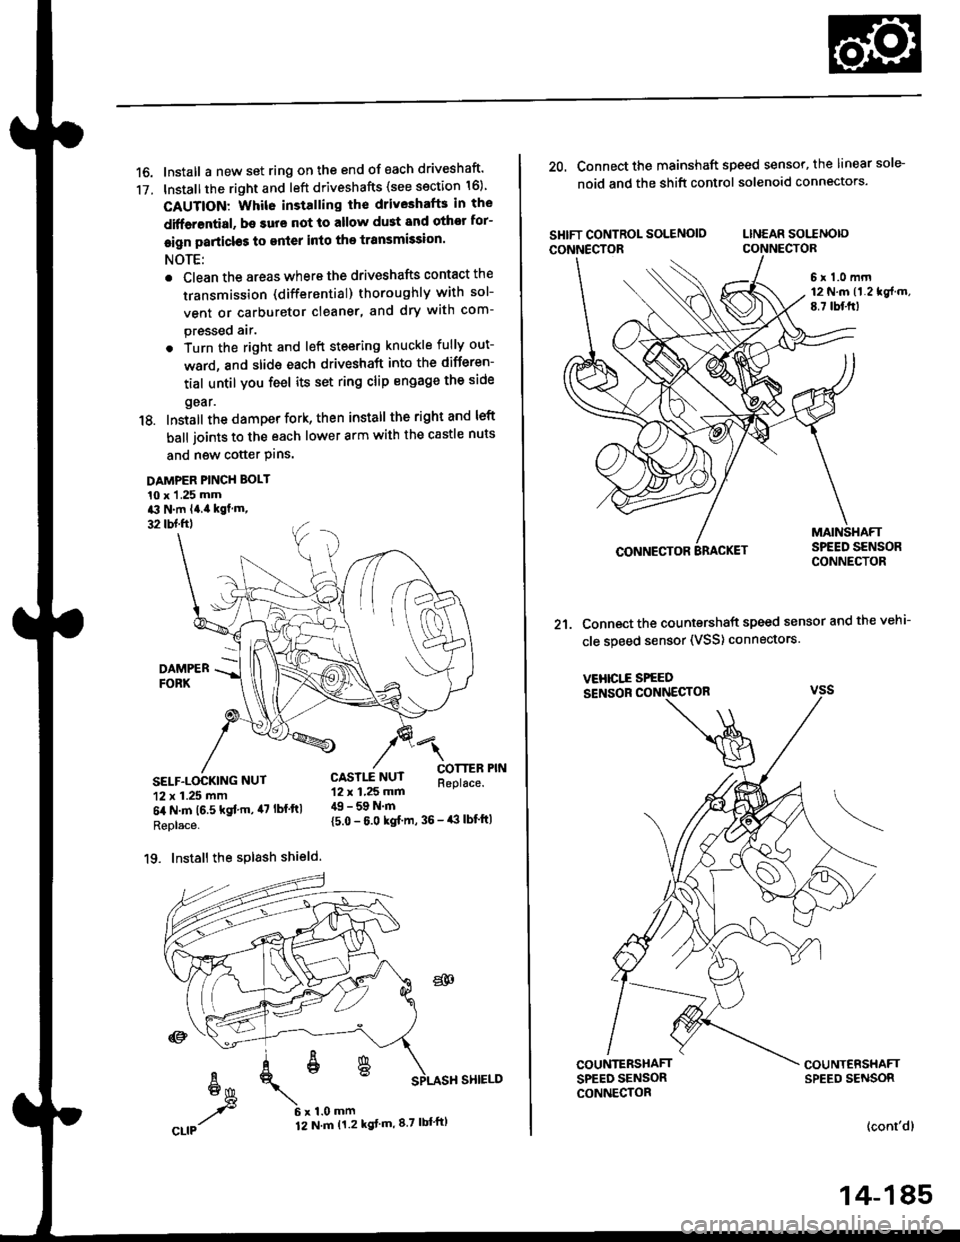 HONDA CIVIC 2000 6.G Workshop Manual 16. Install a new set ring on the end of each driveshaft
17. Installthe right and left driveshafts (see ssction 16)
CAUTION: Whil6 installing the driveshafE in the
diffarential, be surs not lo allow 